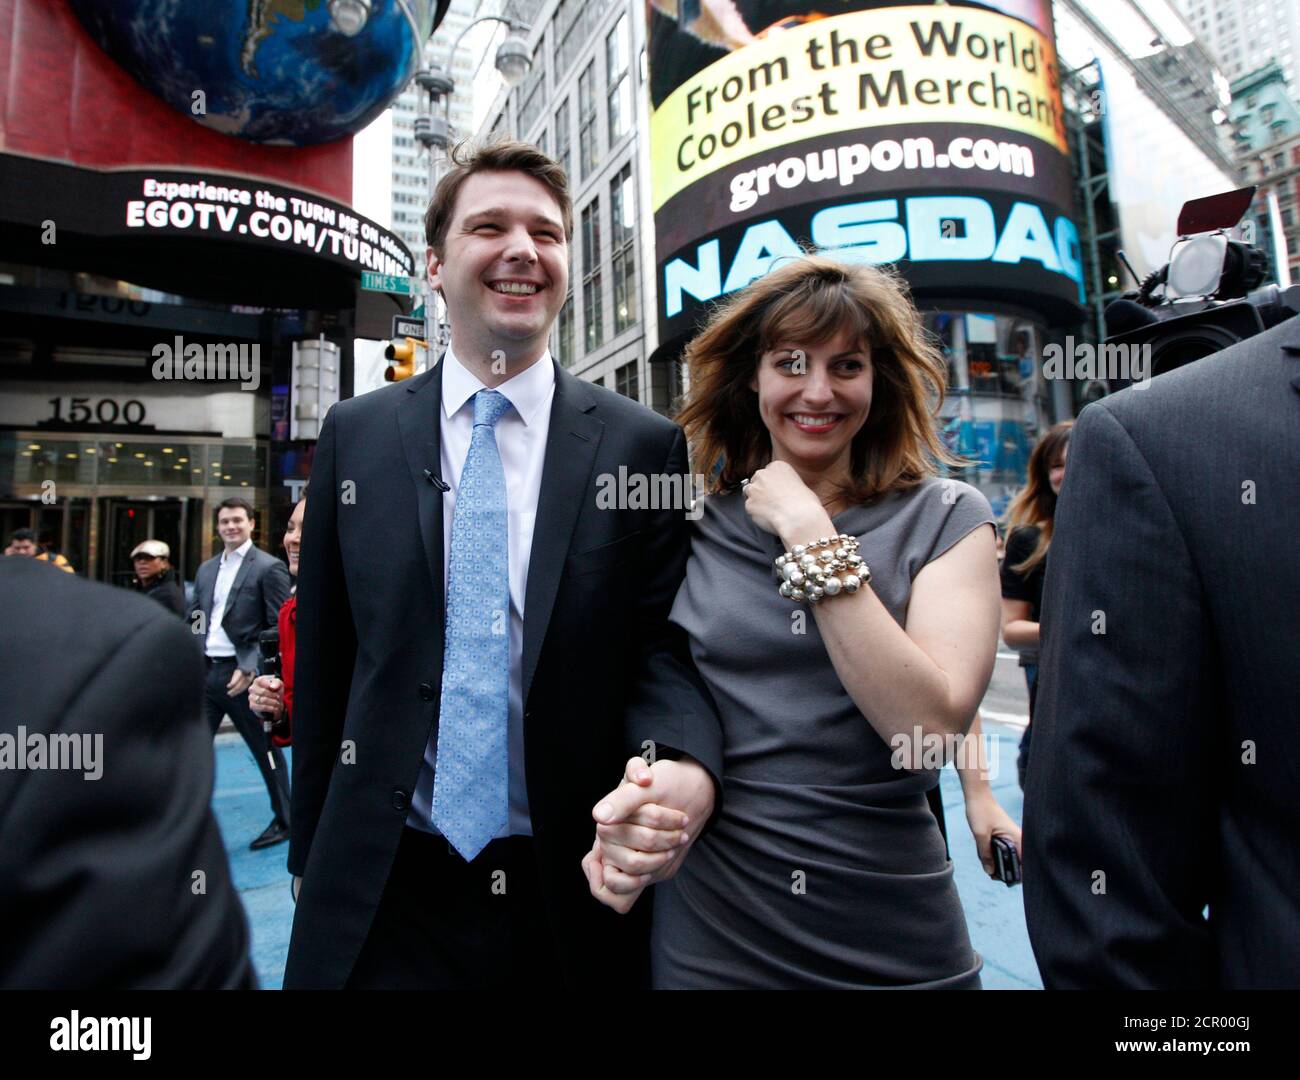 Groupon Chief Executive Andrew Mason walks with his newly married wife, pop musician Jenny Gillespie, outside the Nasdaq Market following his company's IPO in New York November 4, 2011. Shares of daily deals site Groupon Inc rose 46 percent in hectic early trading on Friday. The shares were at $29.15 or 46 percent above their $20 IPO price a few minutes after opening on the Nasdaq. A spokeswoman for Groupon confirmed on August 22, 2011, that Mason and Gillespie are planning to marry in October, but would not specify a date.  REUTERS/Brendan McDermid (UNITED STATES - Tags: BUSINESS ENTERTAINMEN Stock Photo